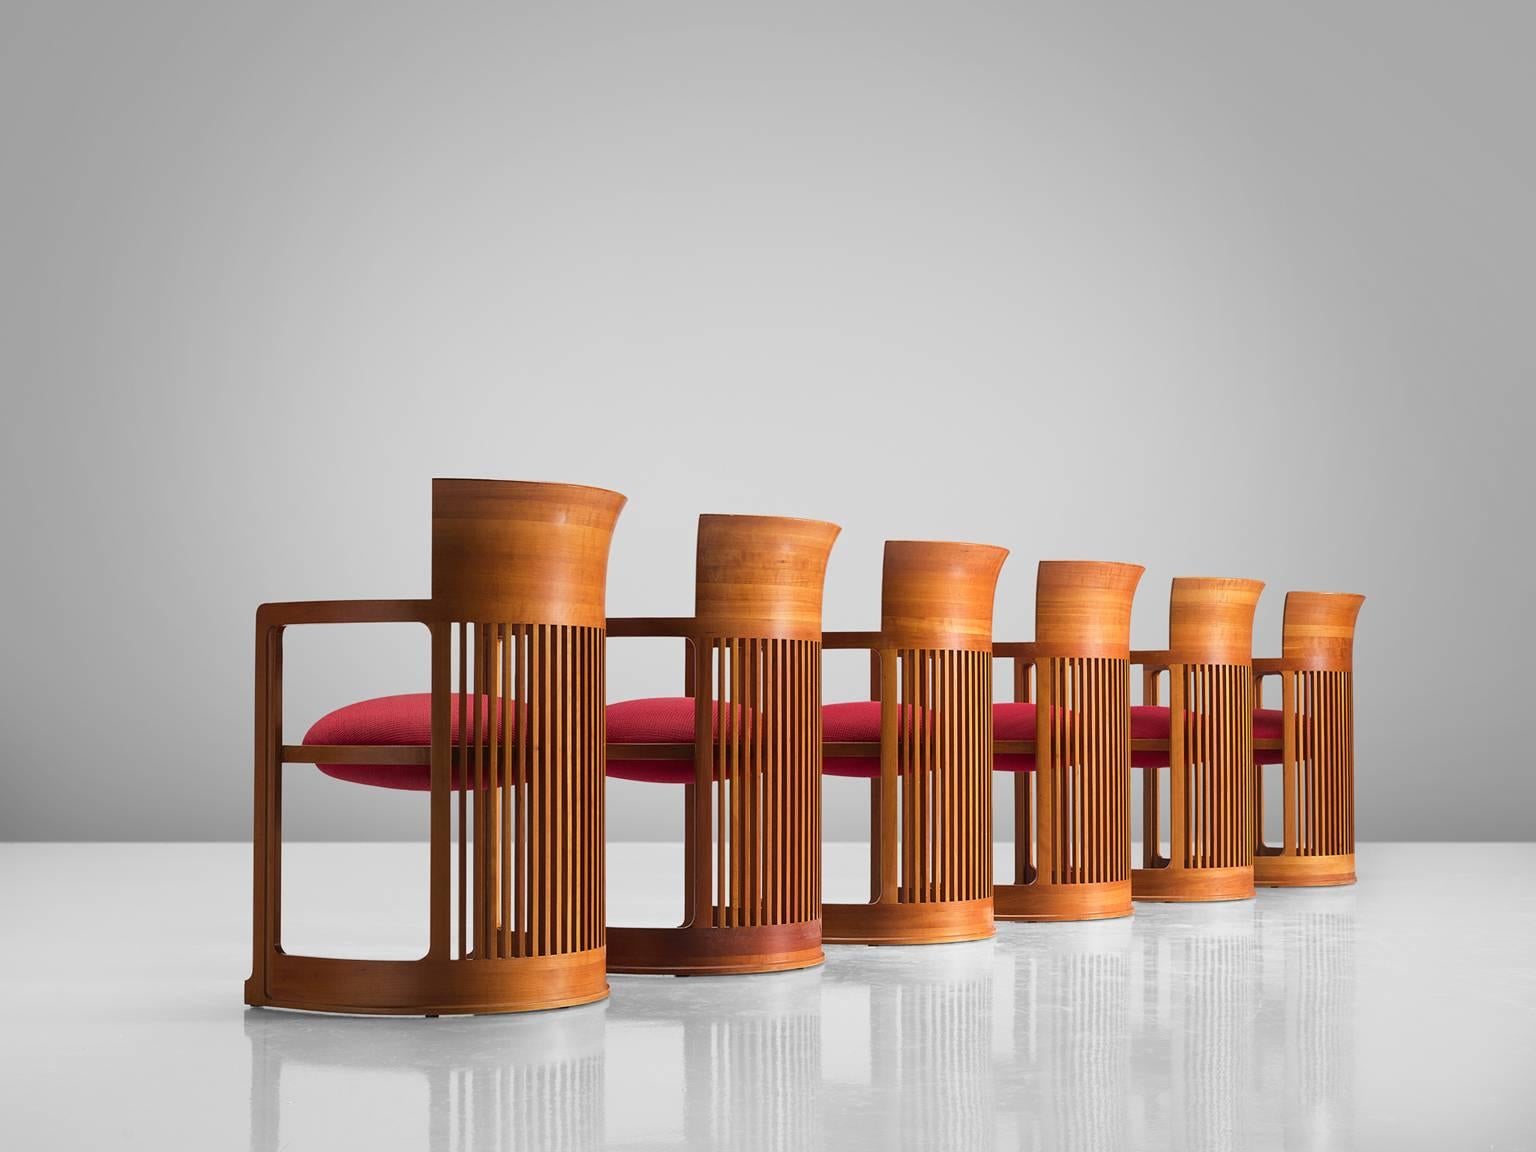 Frank Lloyd Wright for Cassina, six 'barrel' chairs, cherry, red fabric, design 1937, production 1989, United States,

This set of architectural chairs is designed by Frank Lloyd Wright and produced by Cassina. The chairs have a barrel shape and